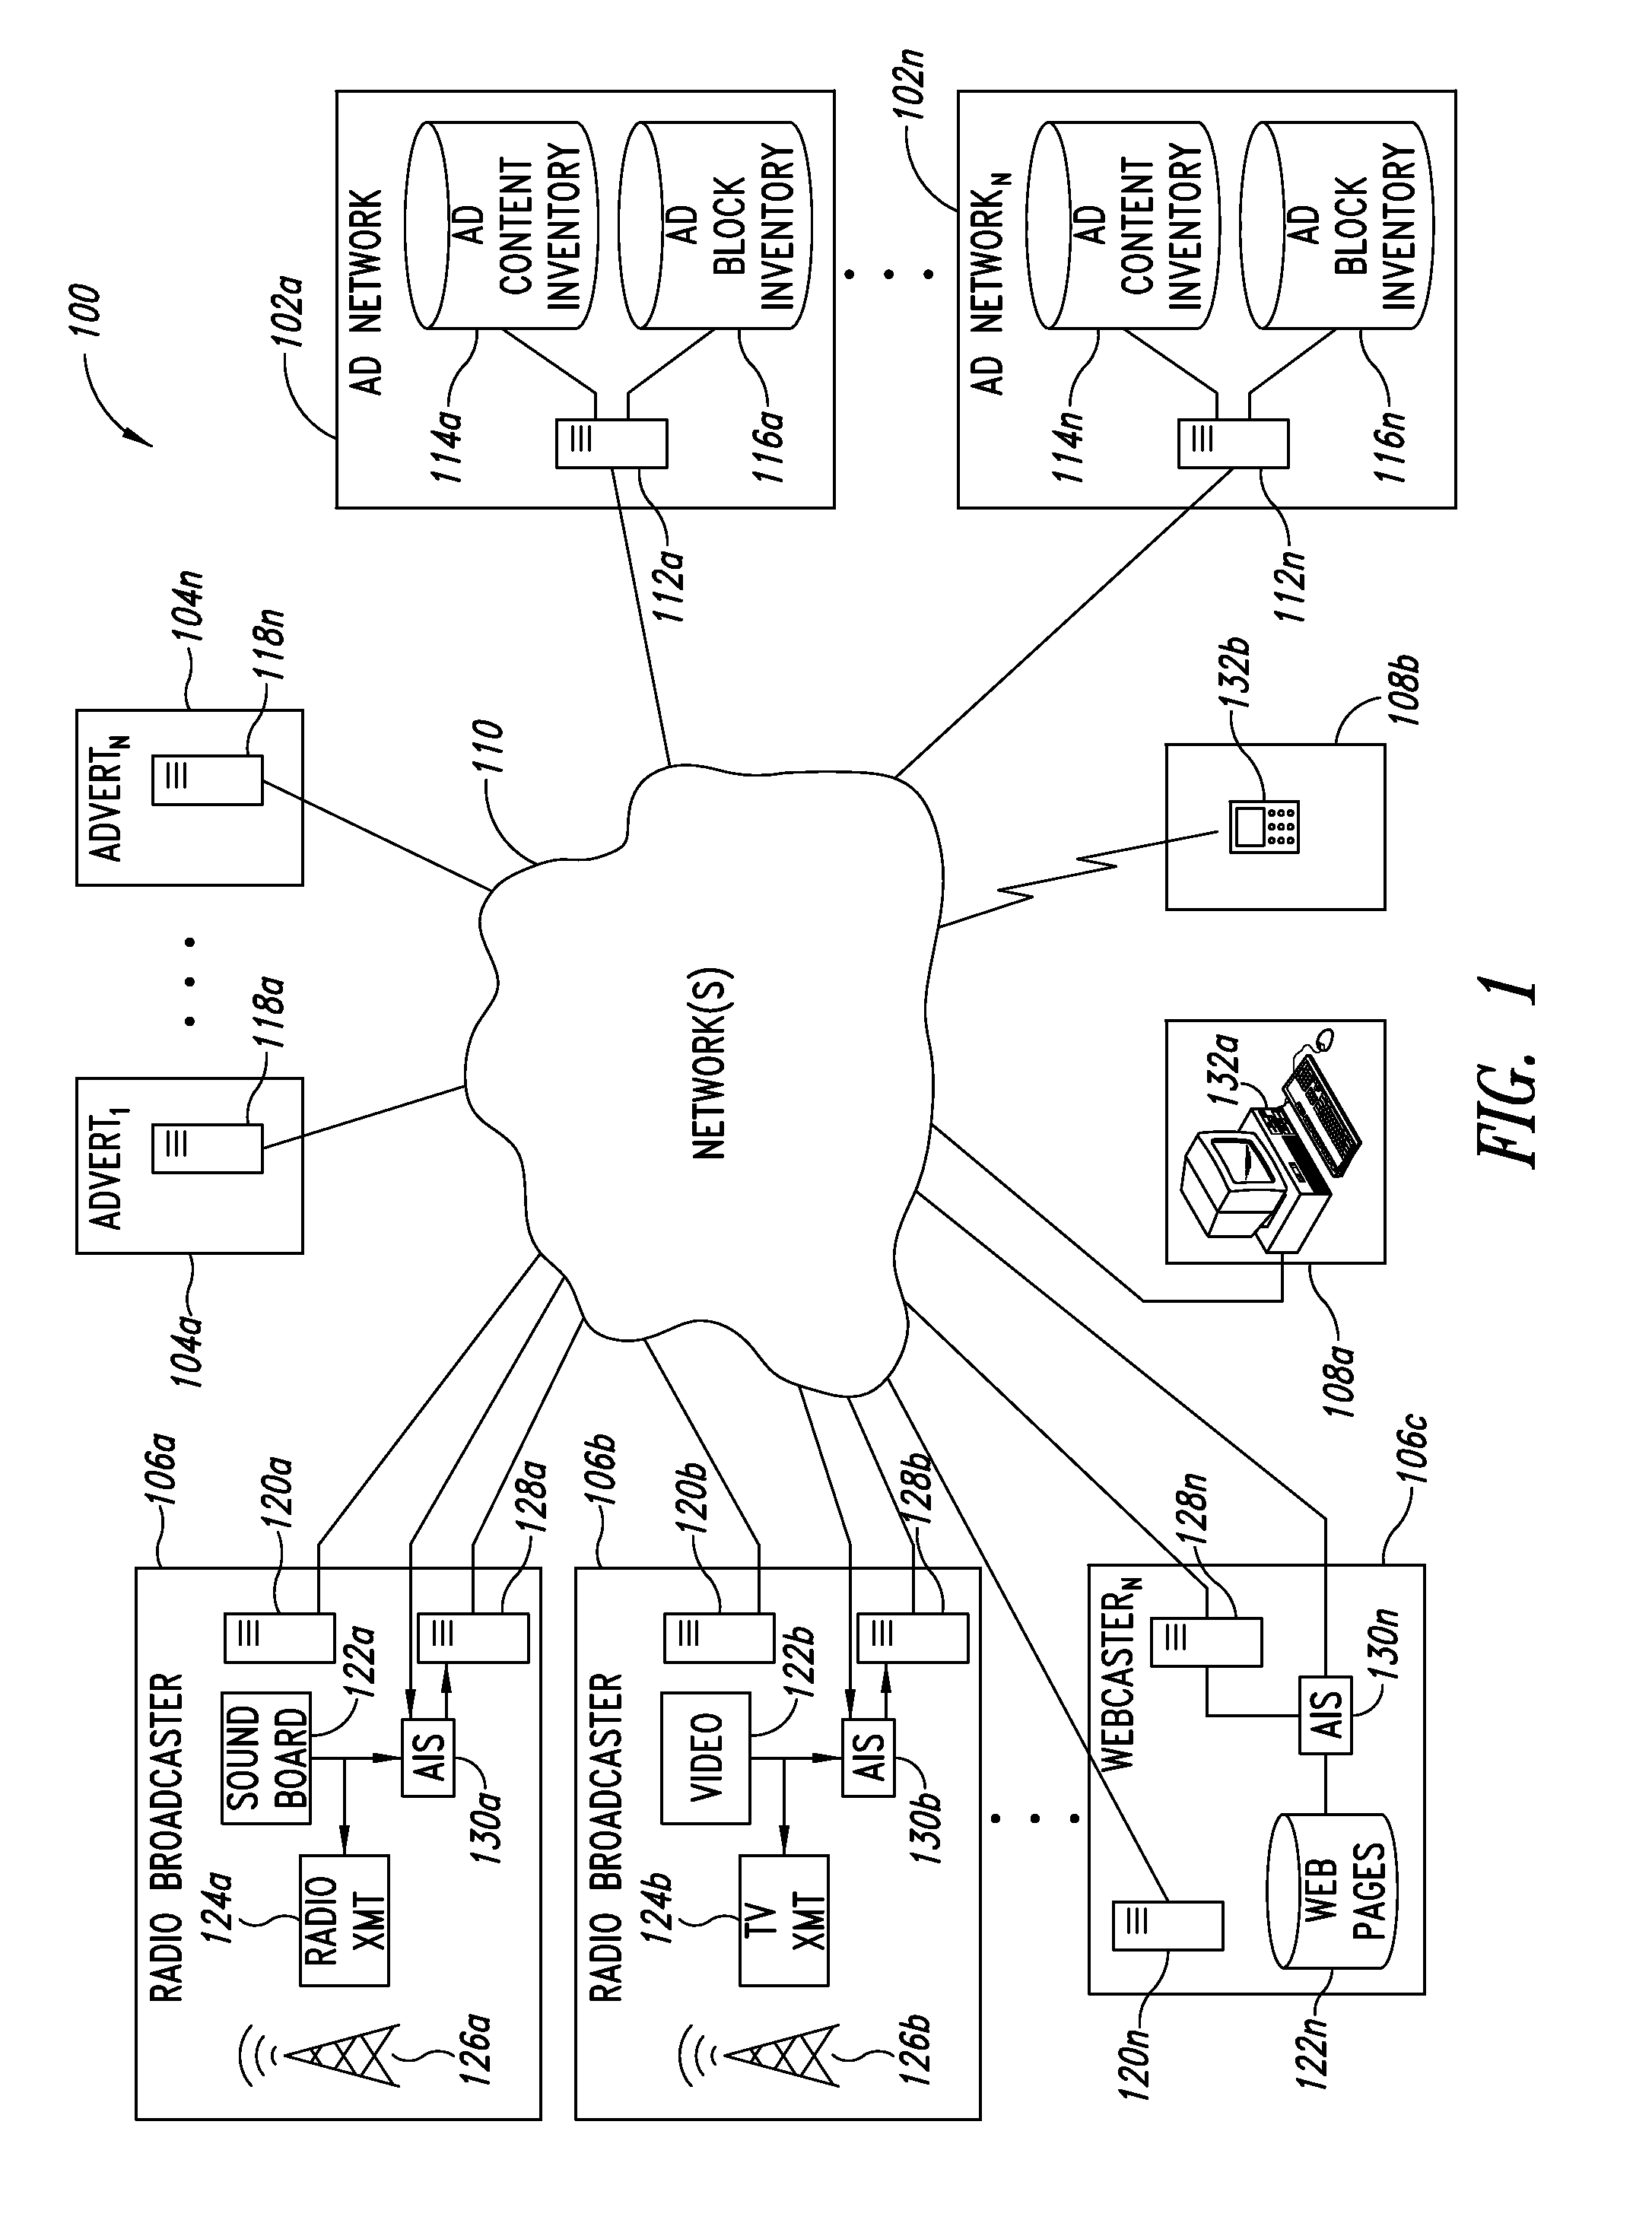 Systems, methods and articles to automatically expose and place material in streams of programming